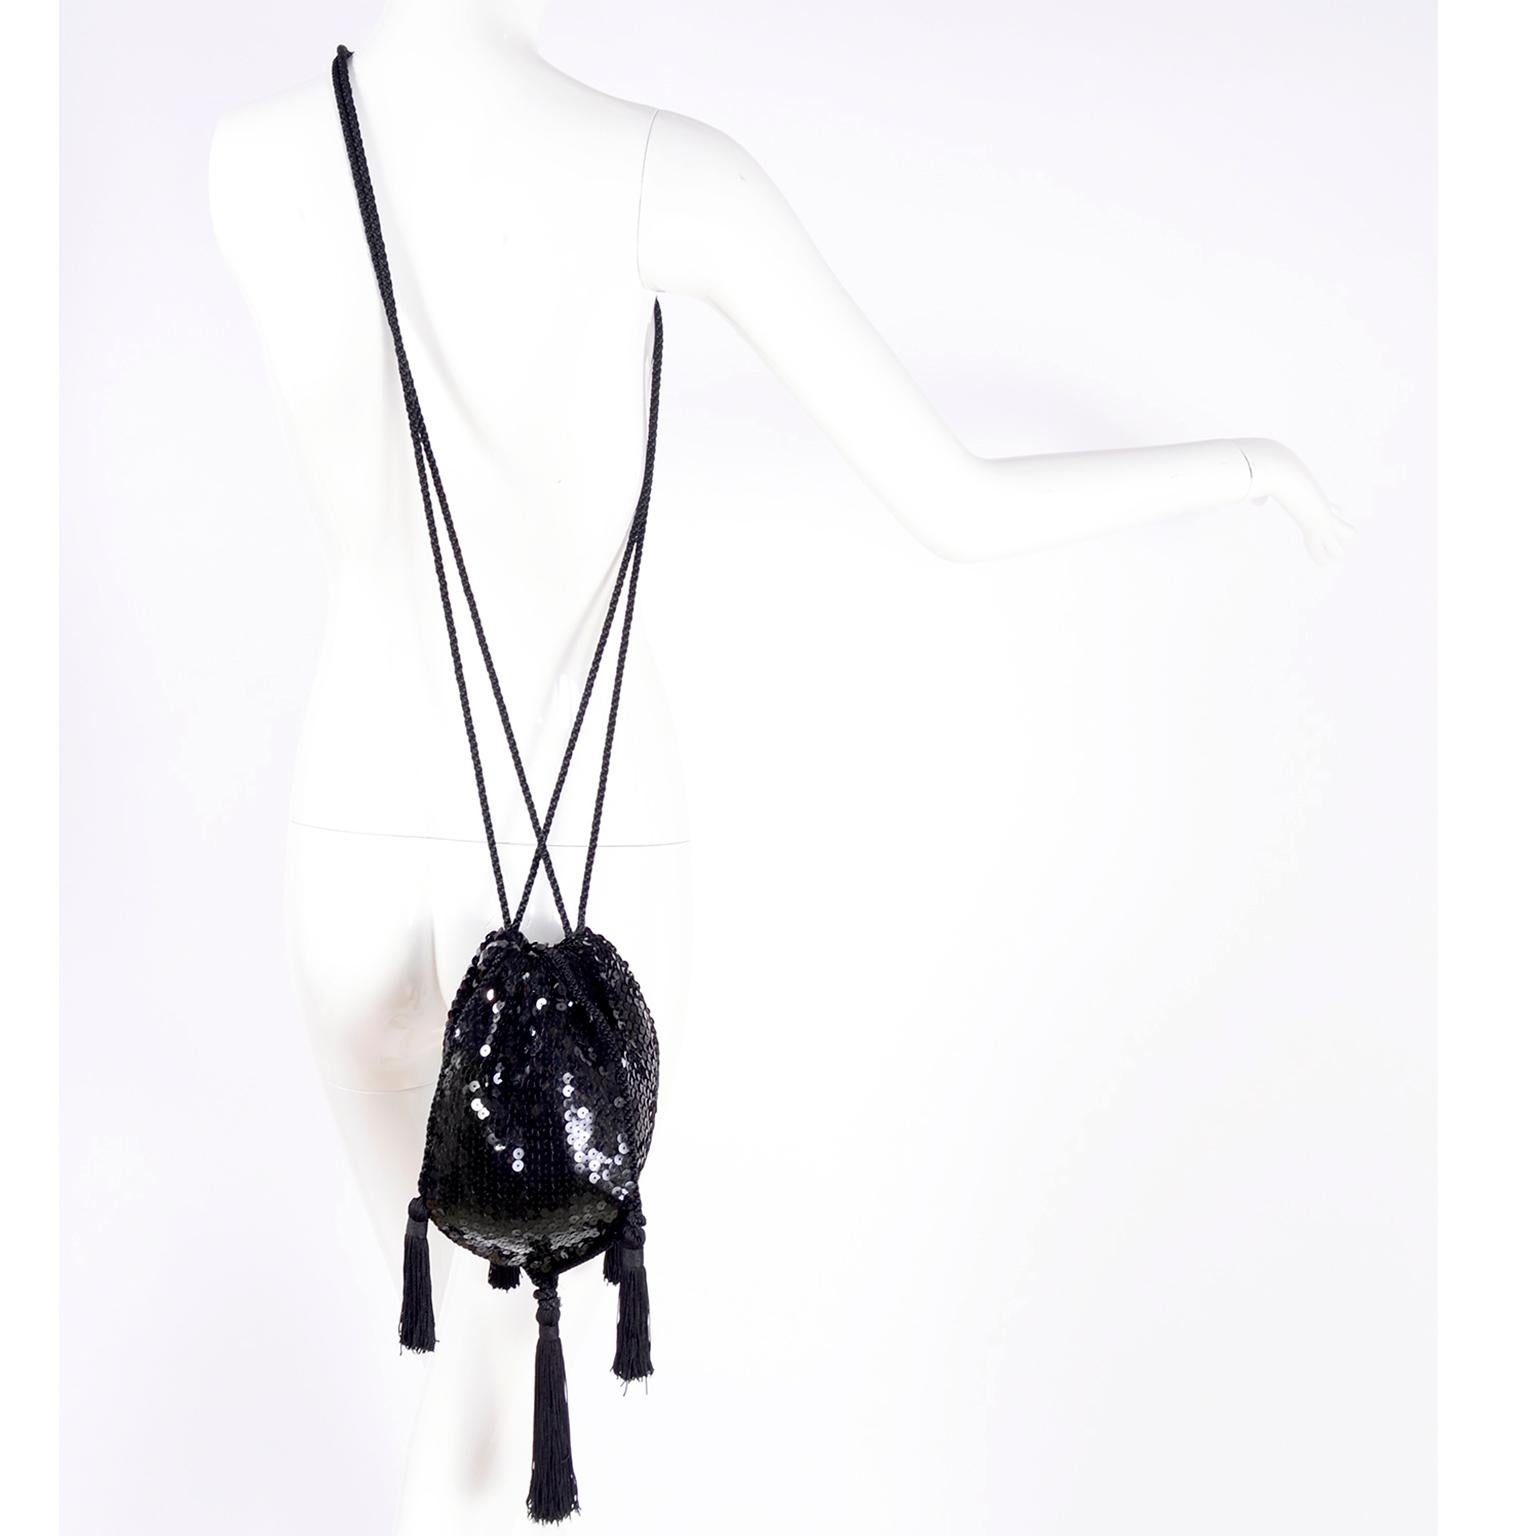 We have always loved vintage Loris Azzaro pieces and this gorgeous evening bag is so incredible! The bag is in black and is covered with black sequins and embellished with luxurious black fringe tassels.   This lovely handbag has a drawstring rope